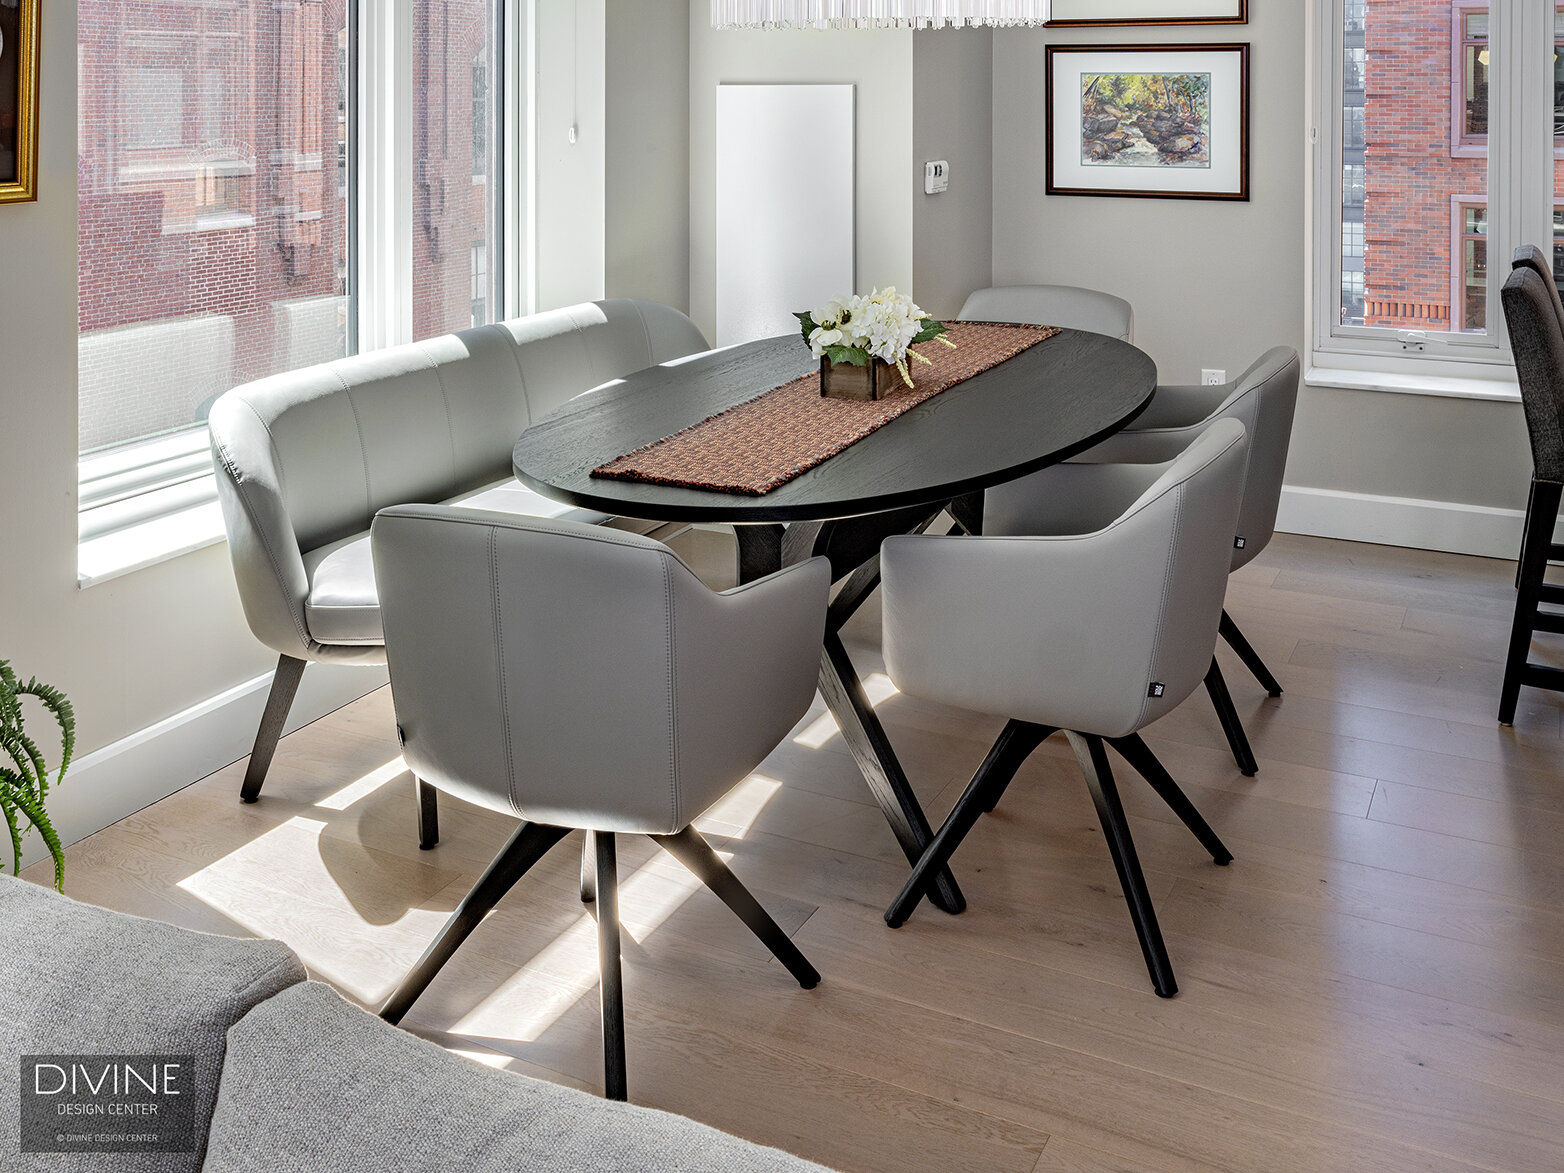  Rolf Benz dining chairs and a bench sit around a round, wood dining table in the condominium’s dining area. Large windows cast a bright, sunny light over the area.  